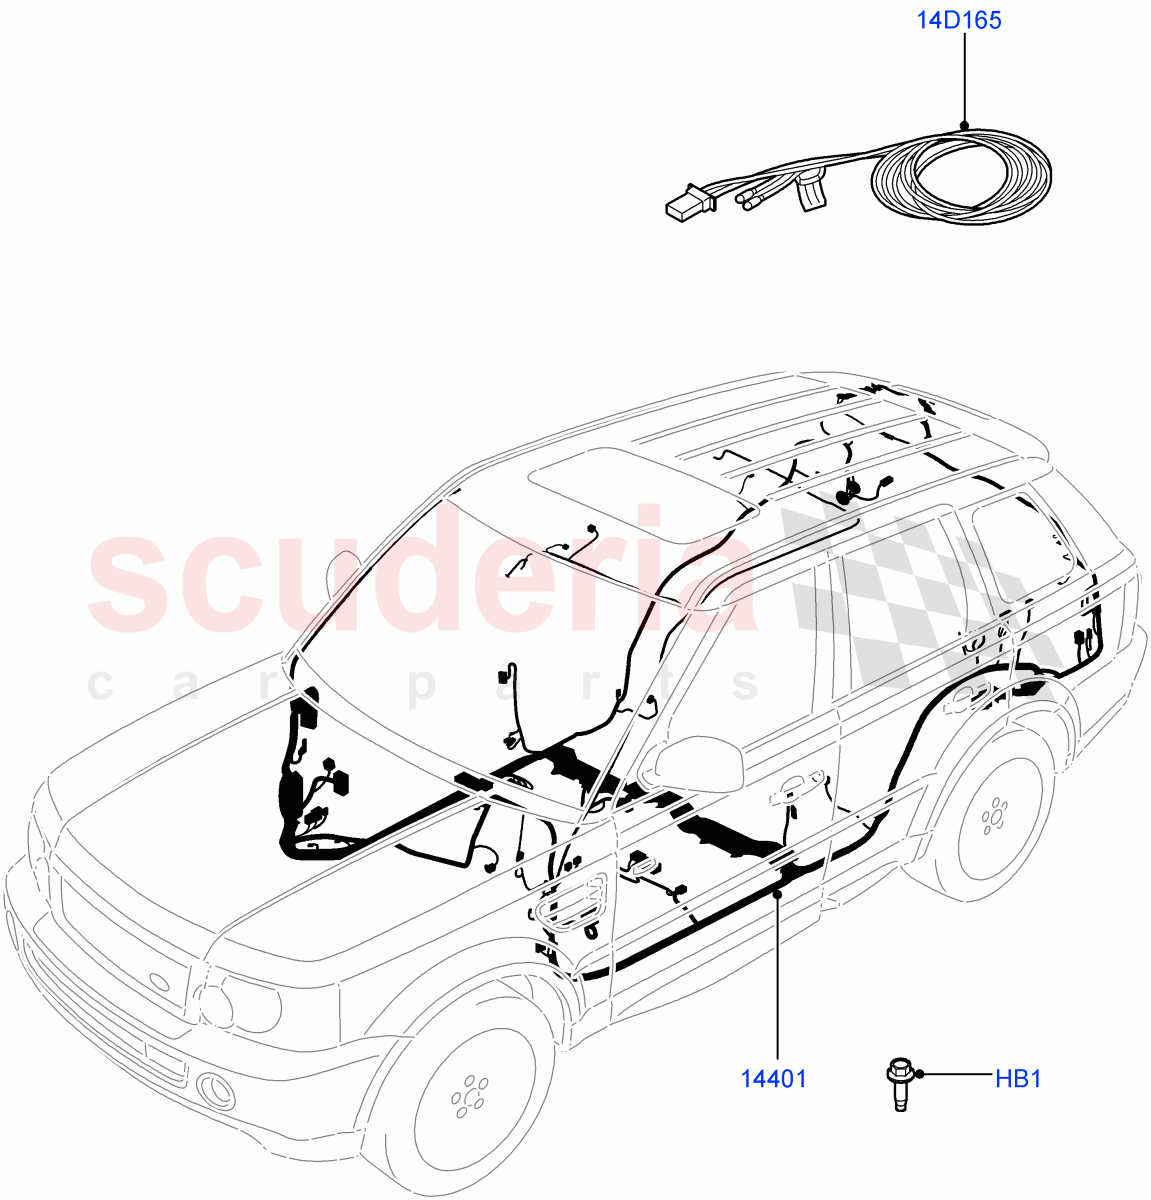 Electrical Wiring - Engine And Dash(Main Harness)((V)FROMAA000001,(V)TOAA999999) of Land Rover Land Rover Range Rover Sport (2010-2013) [5.0 OHC SGDI SC V8 Petrol]